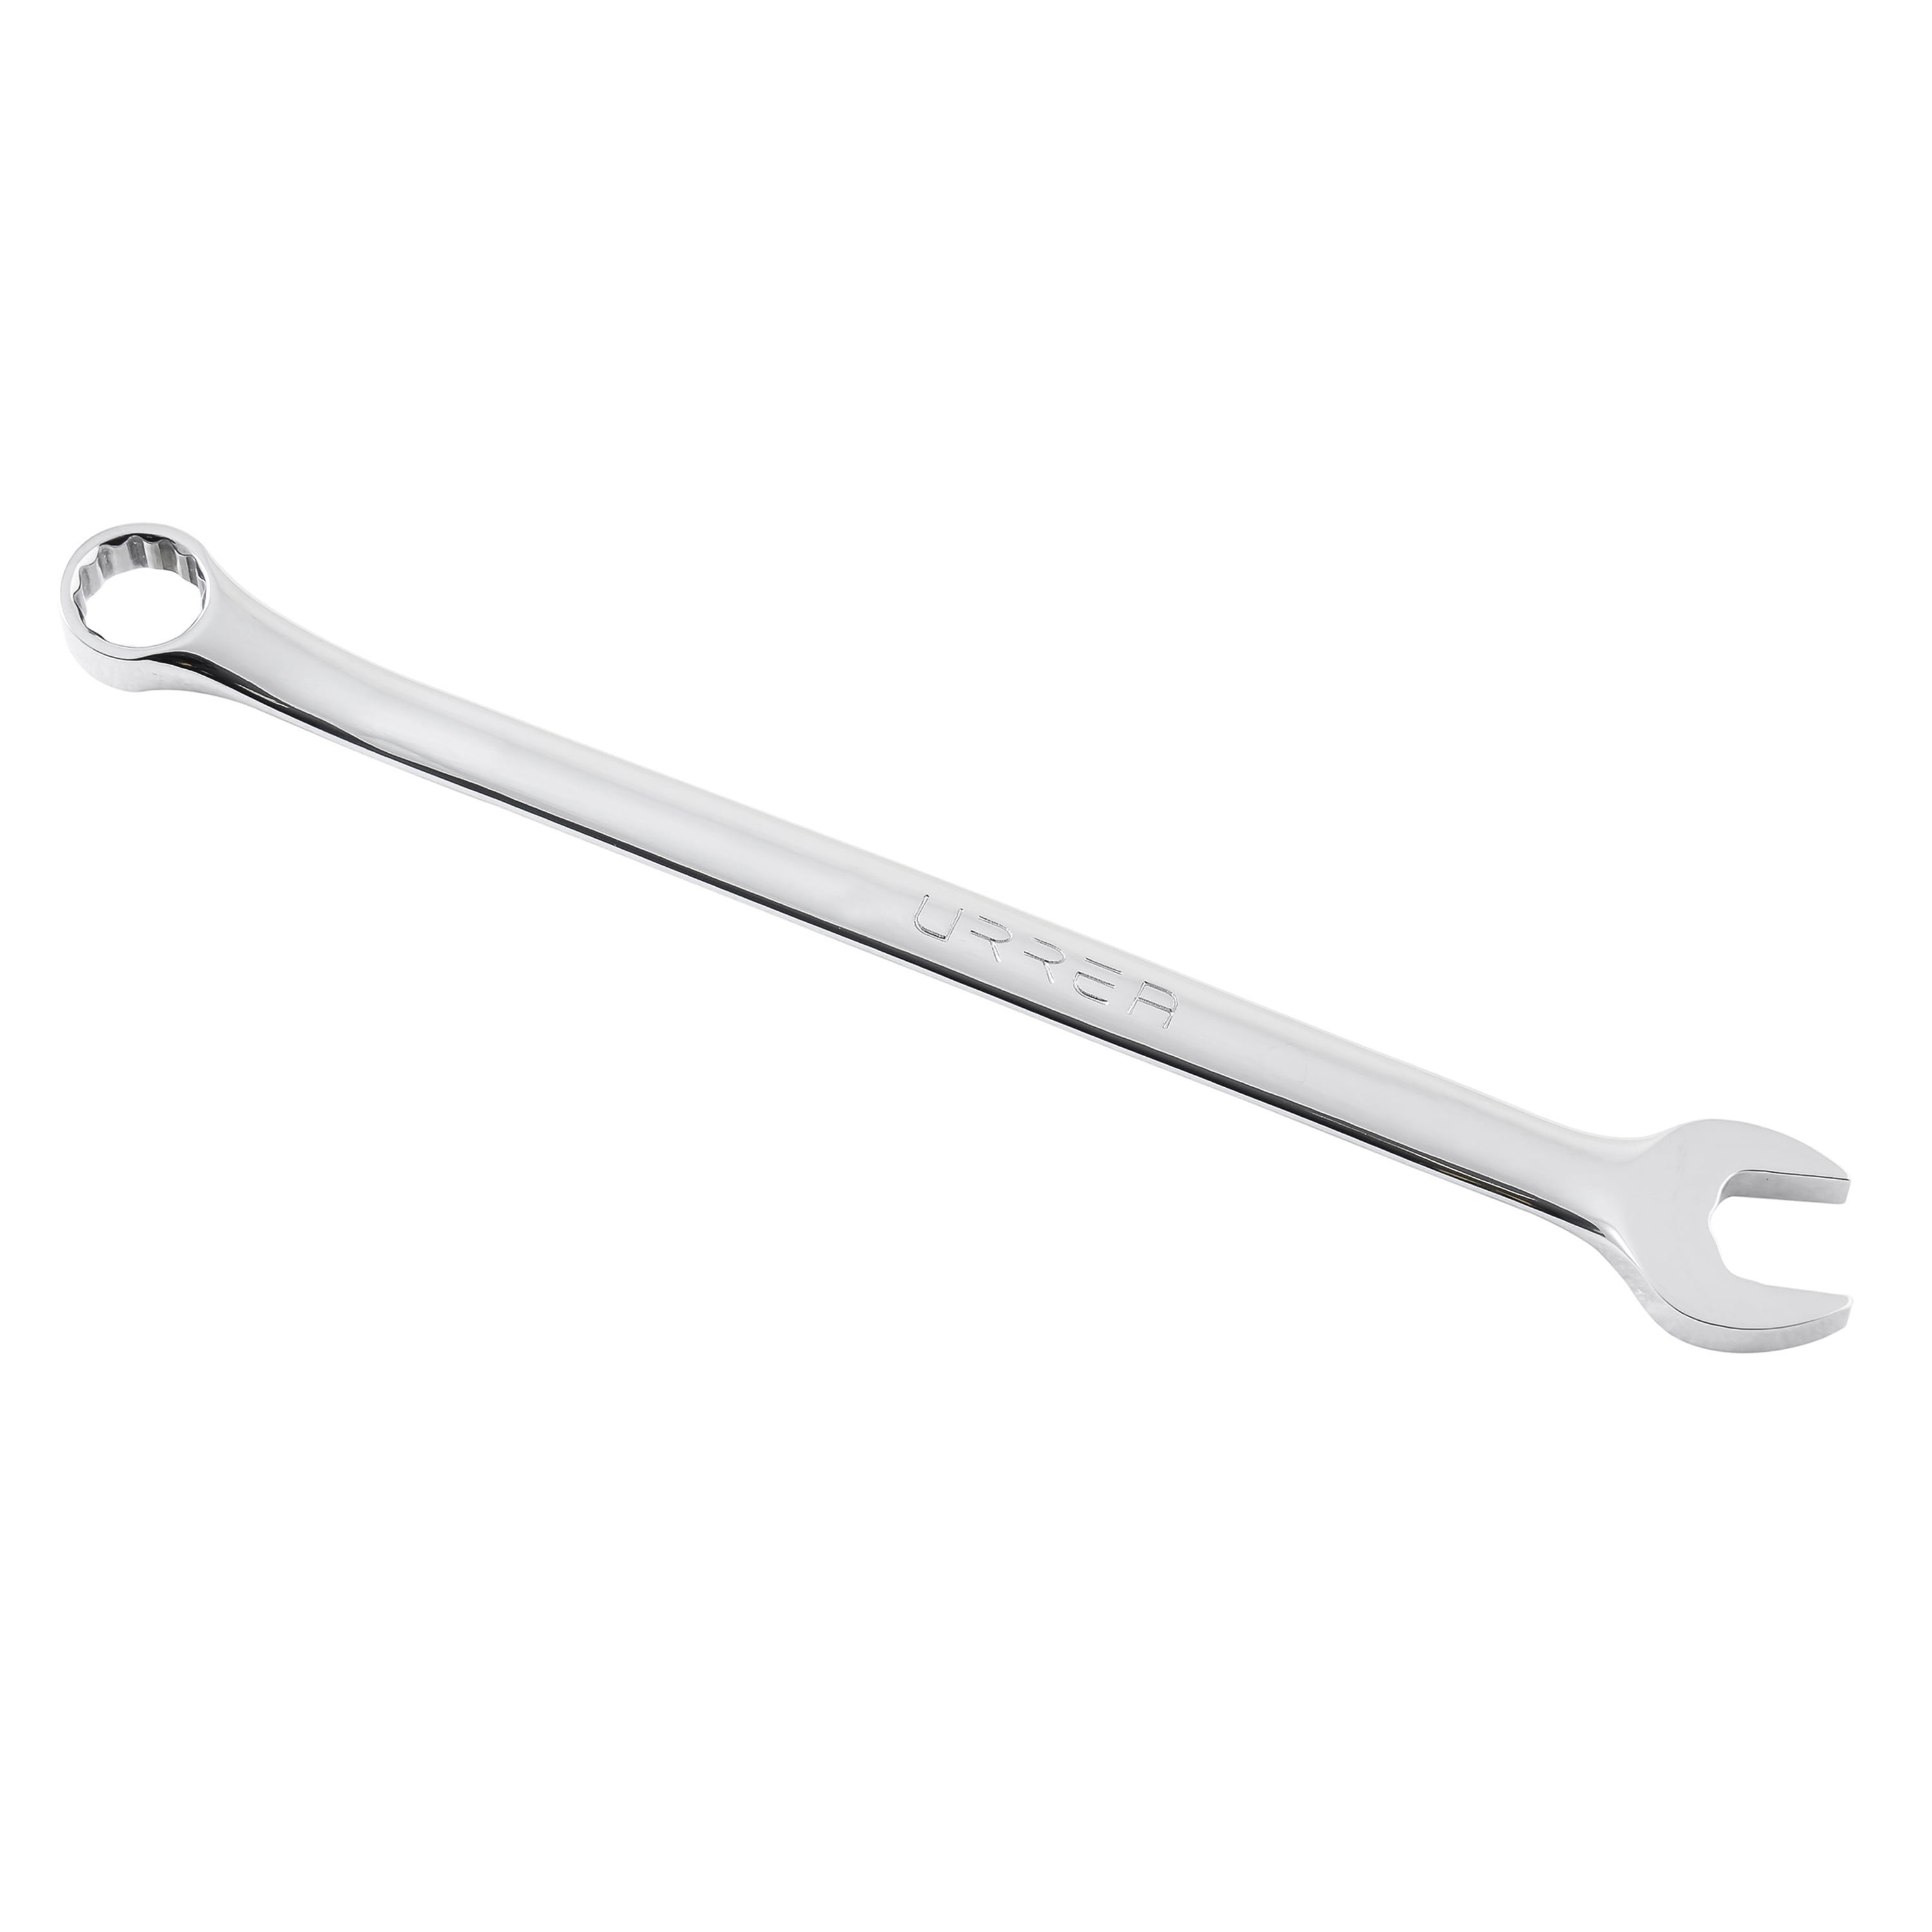 URREA 1217ML 17MM EXTRA LONG COMBINATION WRENCH 